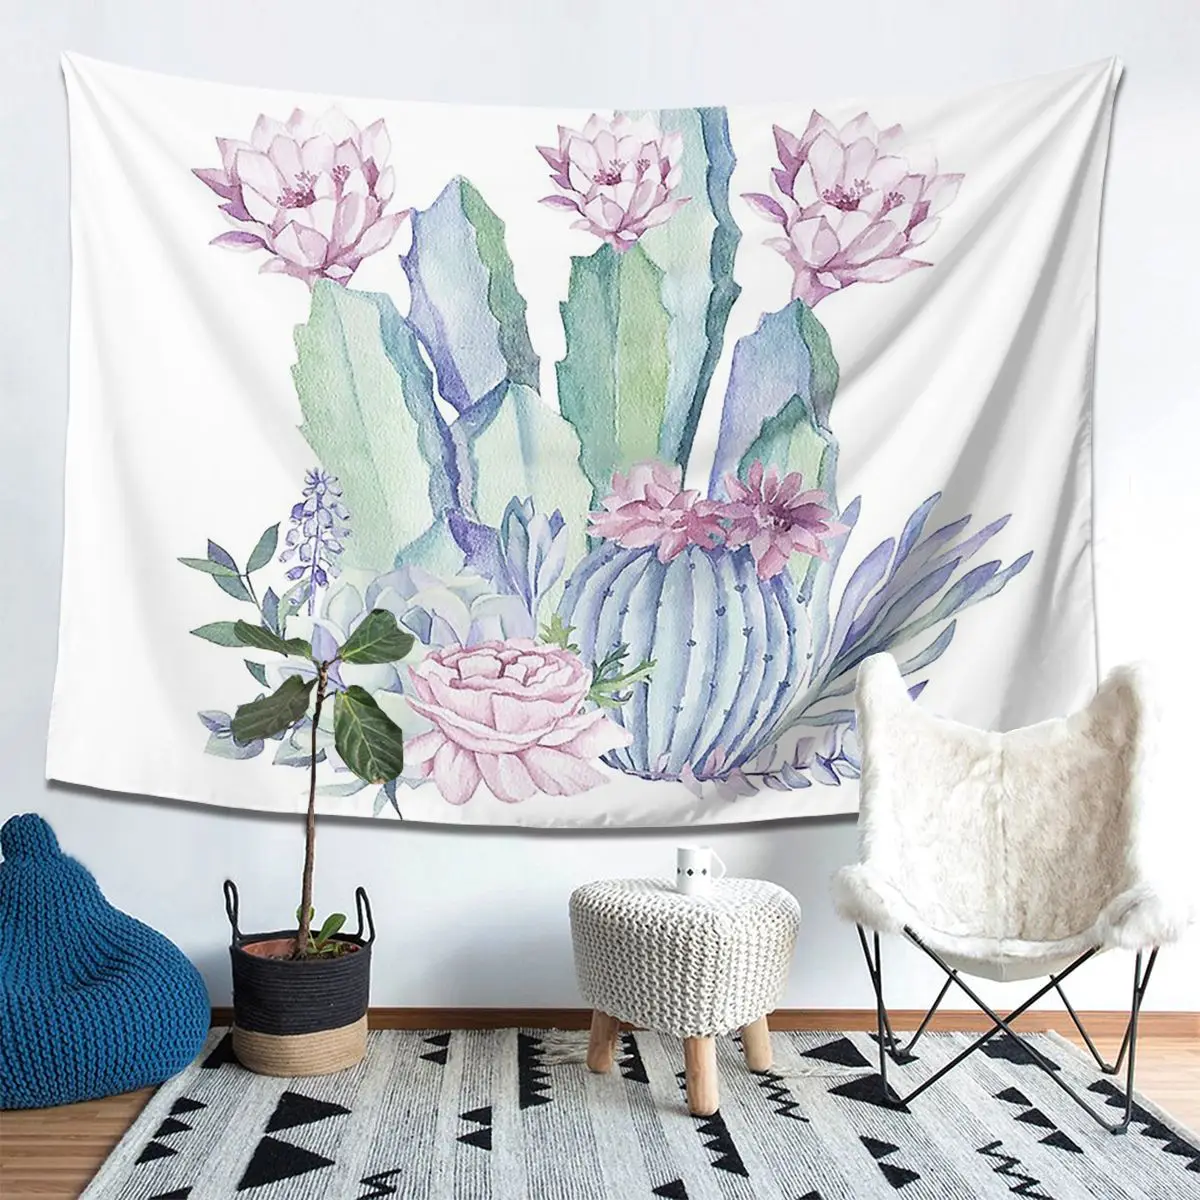 

Trendy Cactus Pink And Mint Green Desert Cacti Design Aesthetic Decor Tapestry Wall Hanging Tapestries for Living Room Bedroom